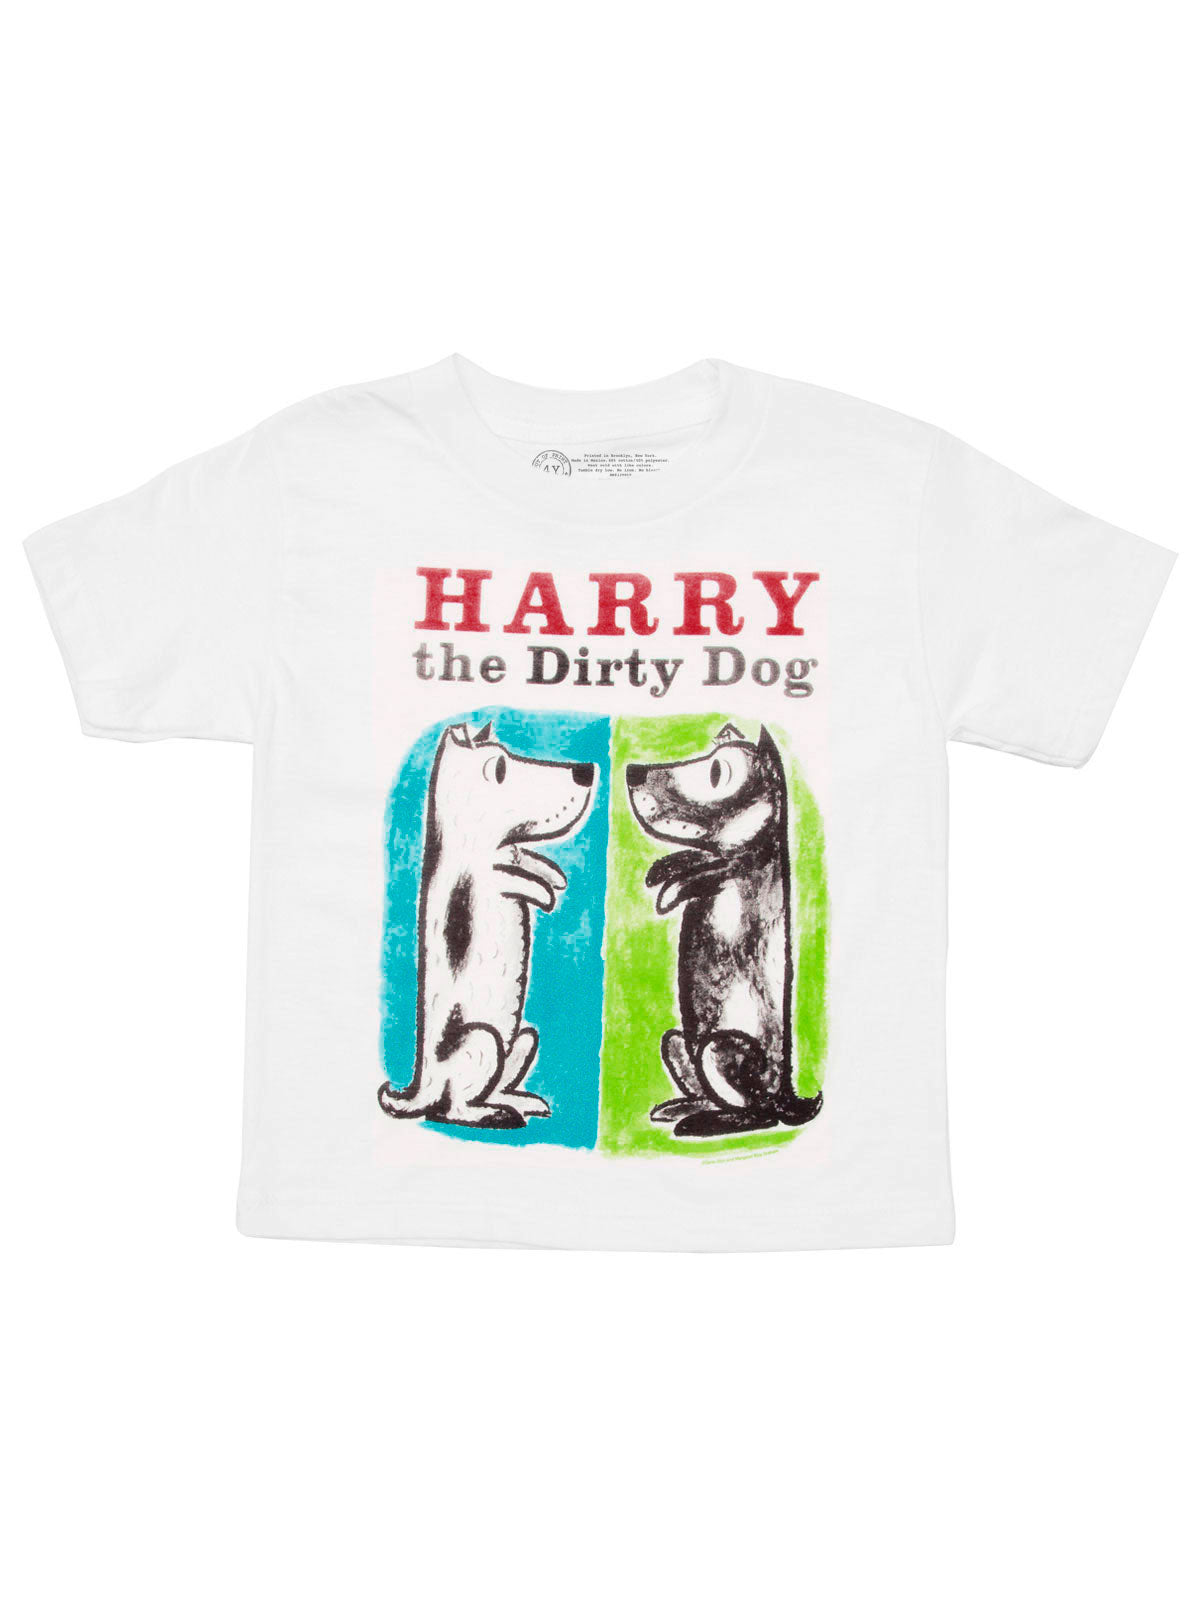 Harry the dirty dog kids book t